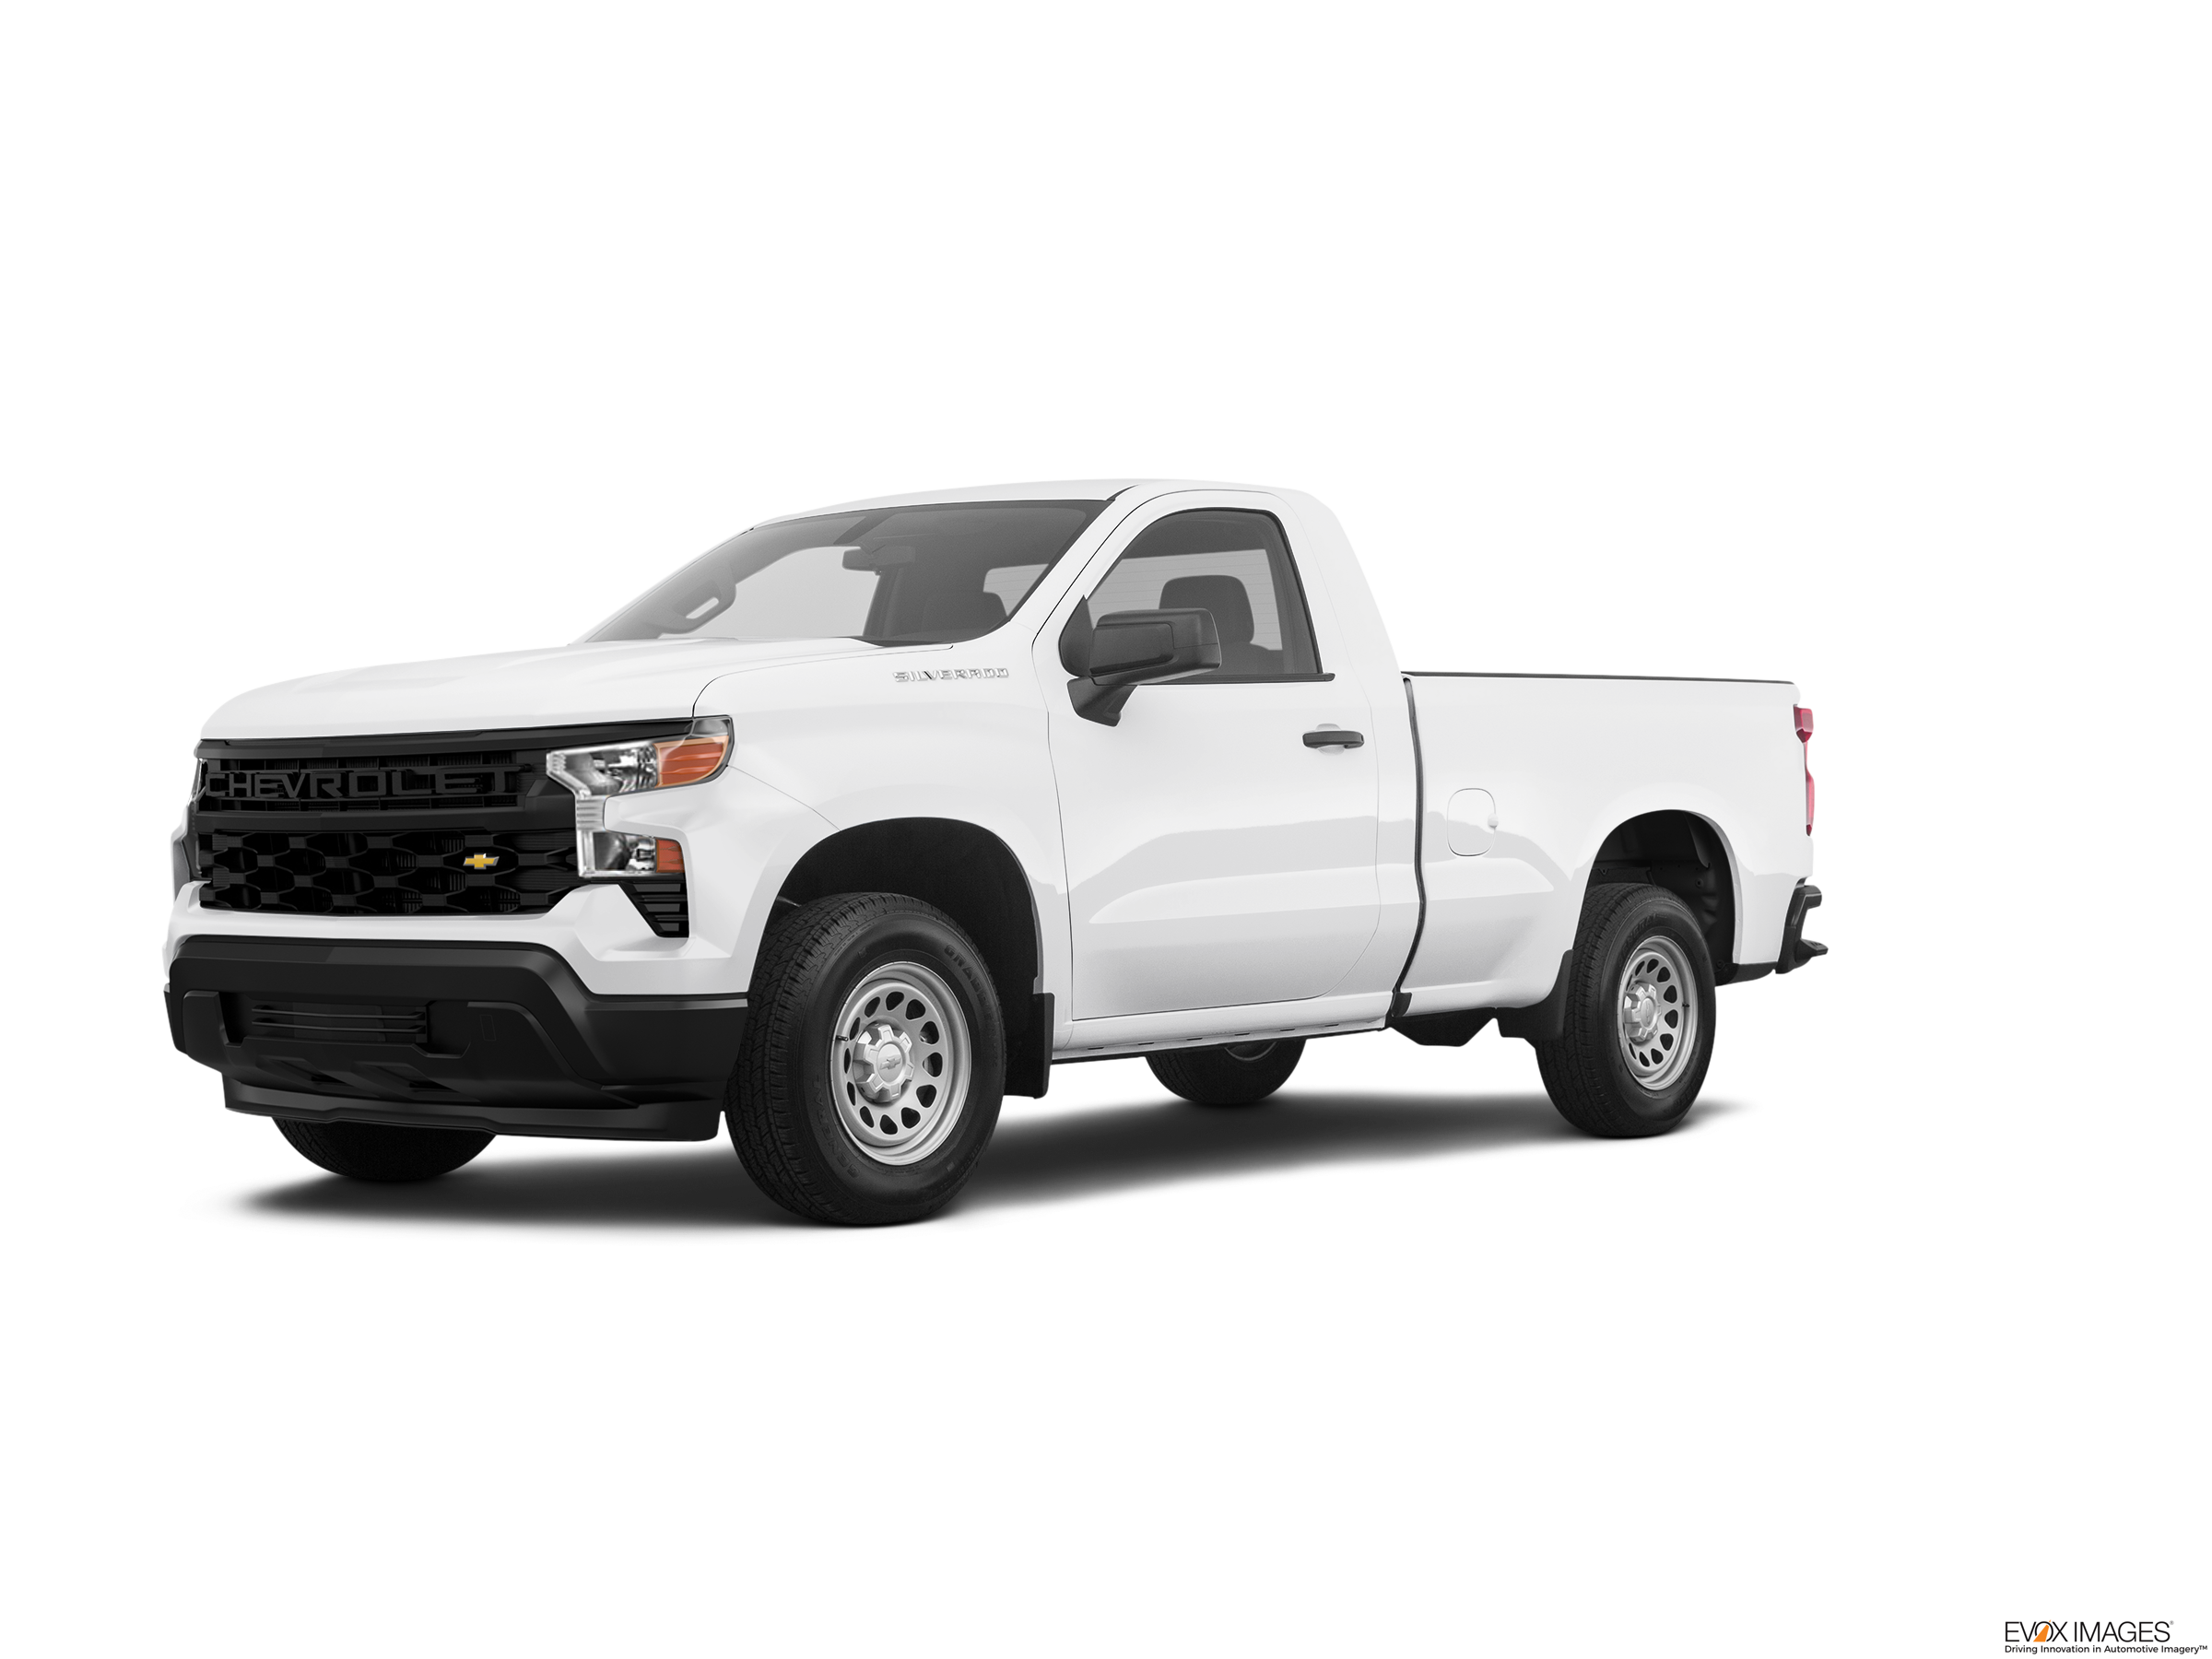 2023-chevy-single-cab-release-date-jandaweb